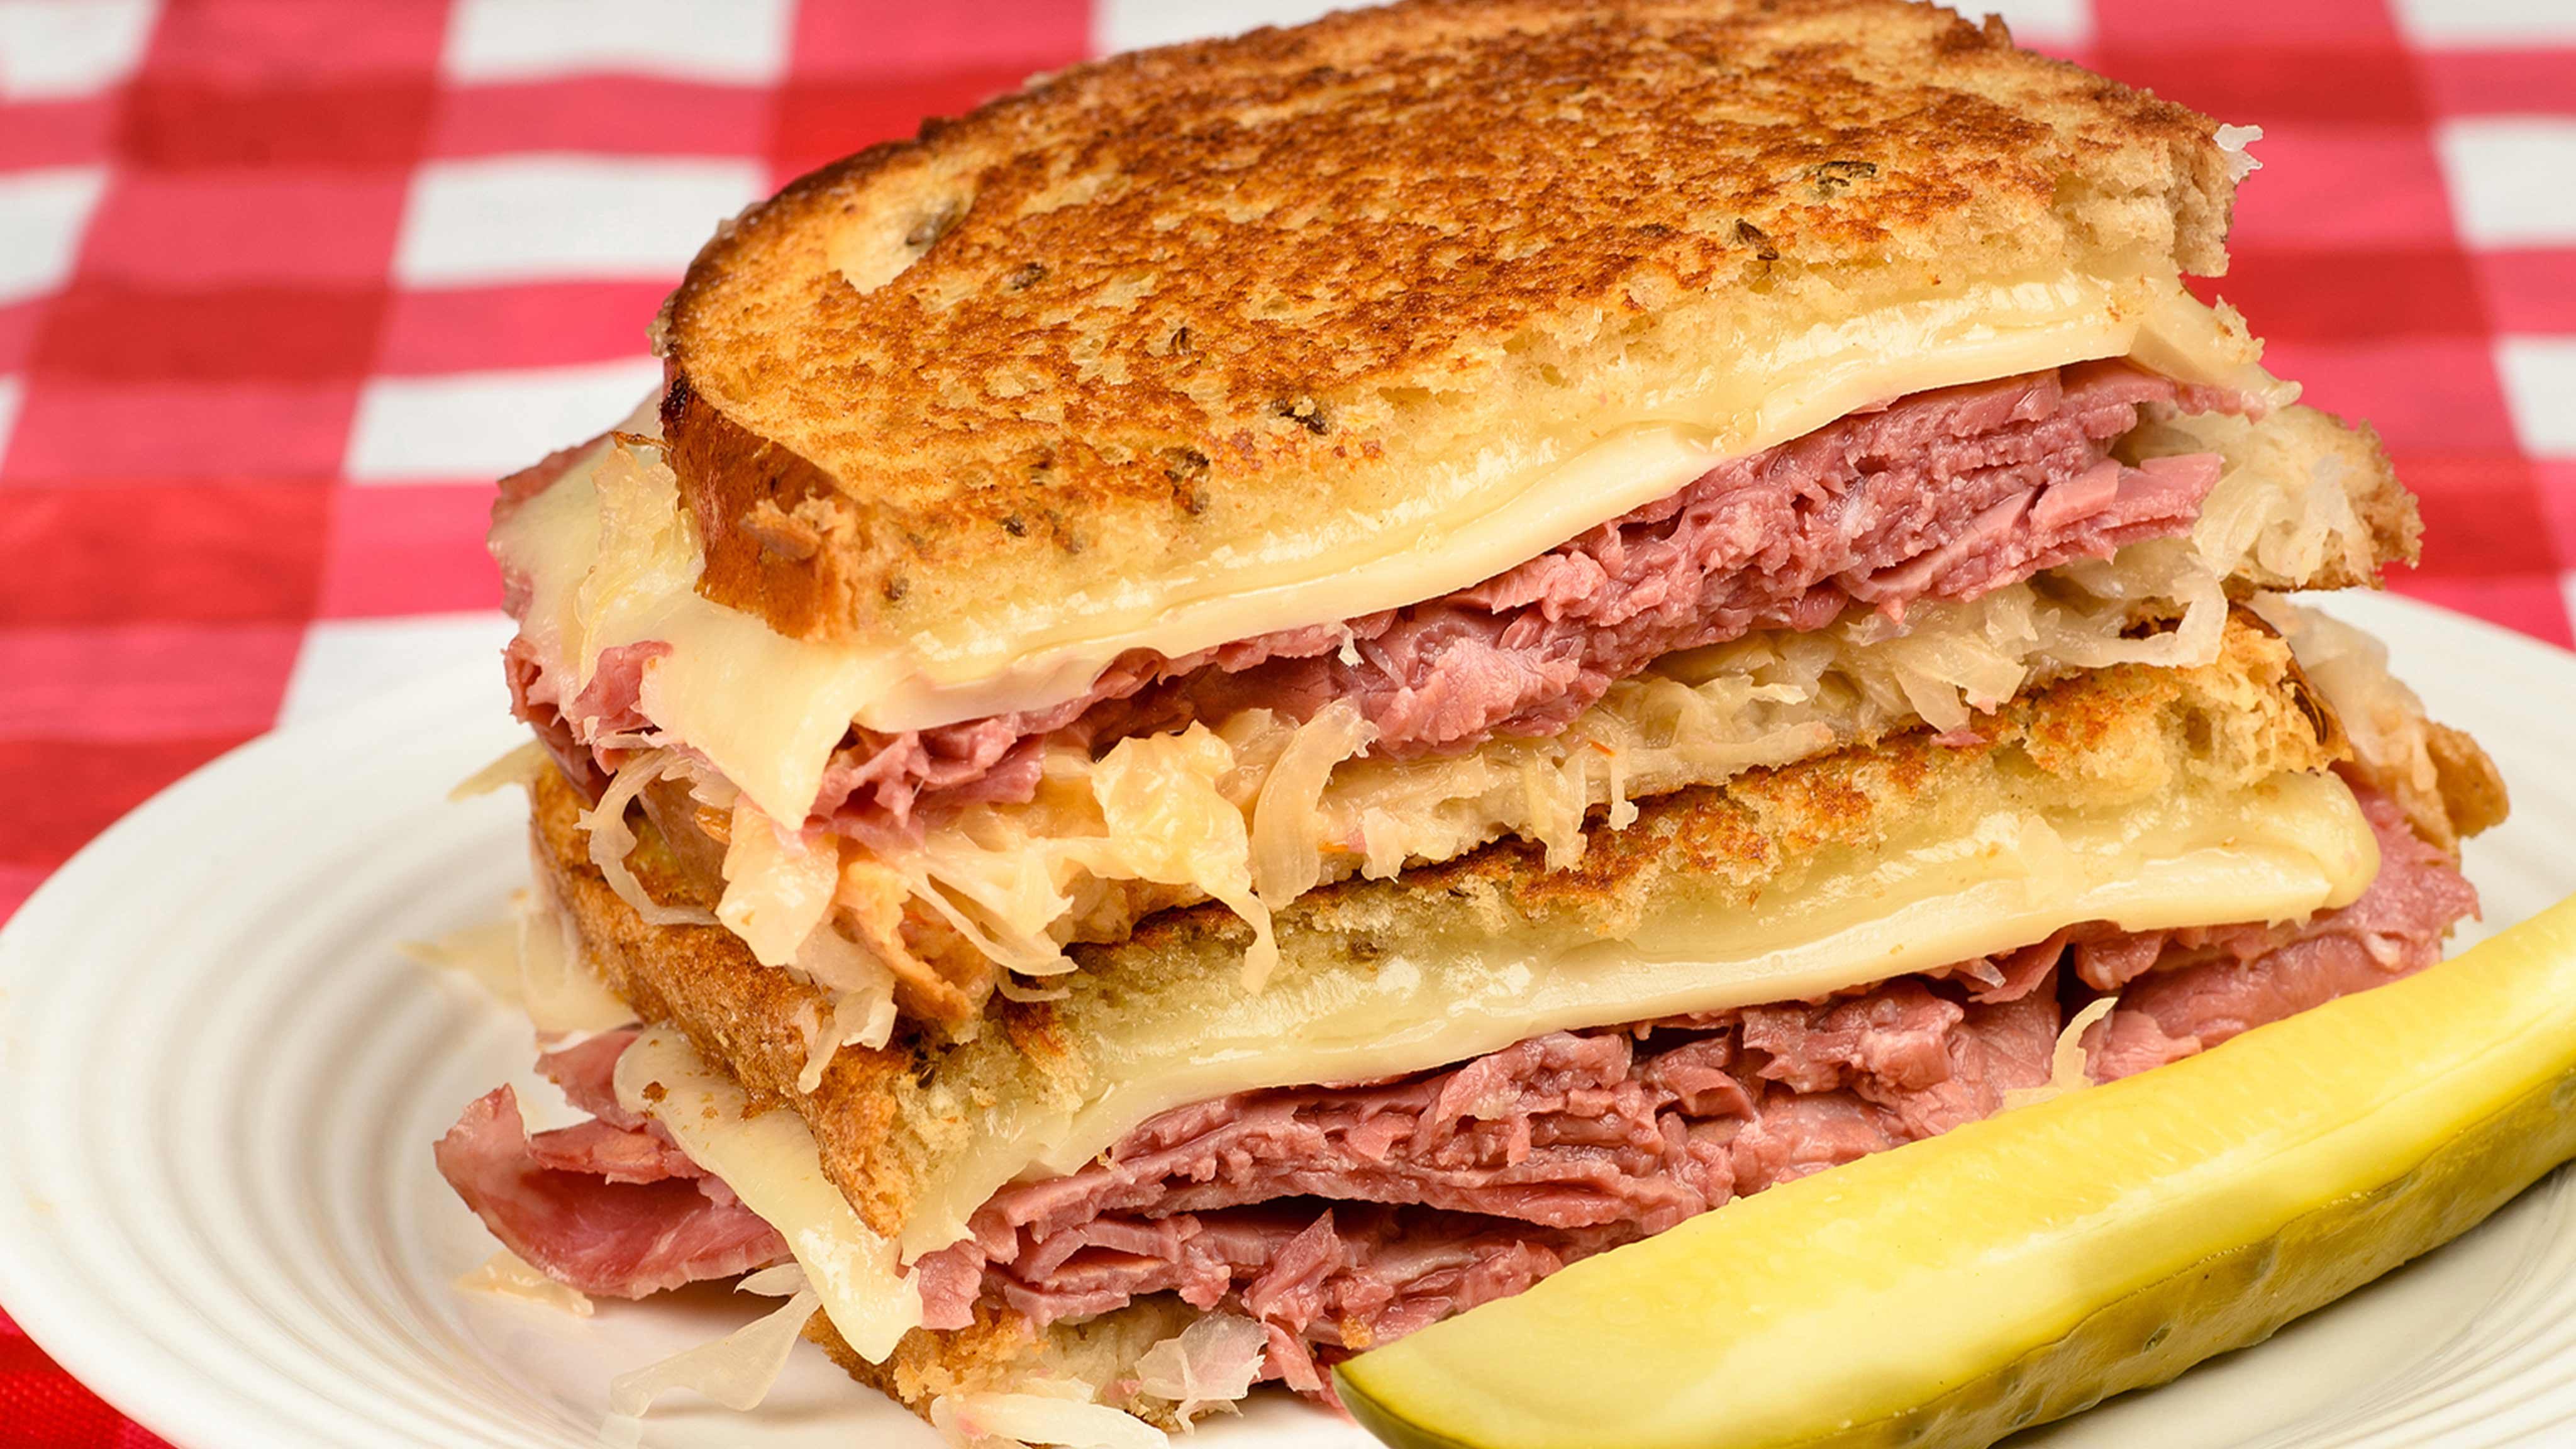 Foreigners Confess Their Favorite American Foods - reuben sandwich